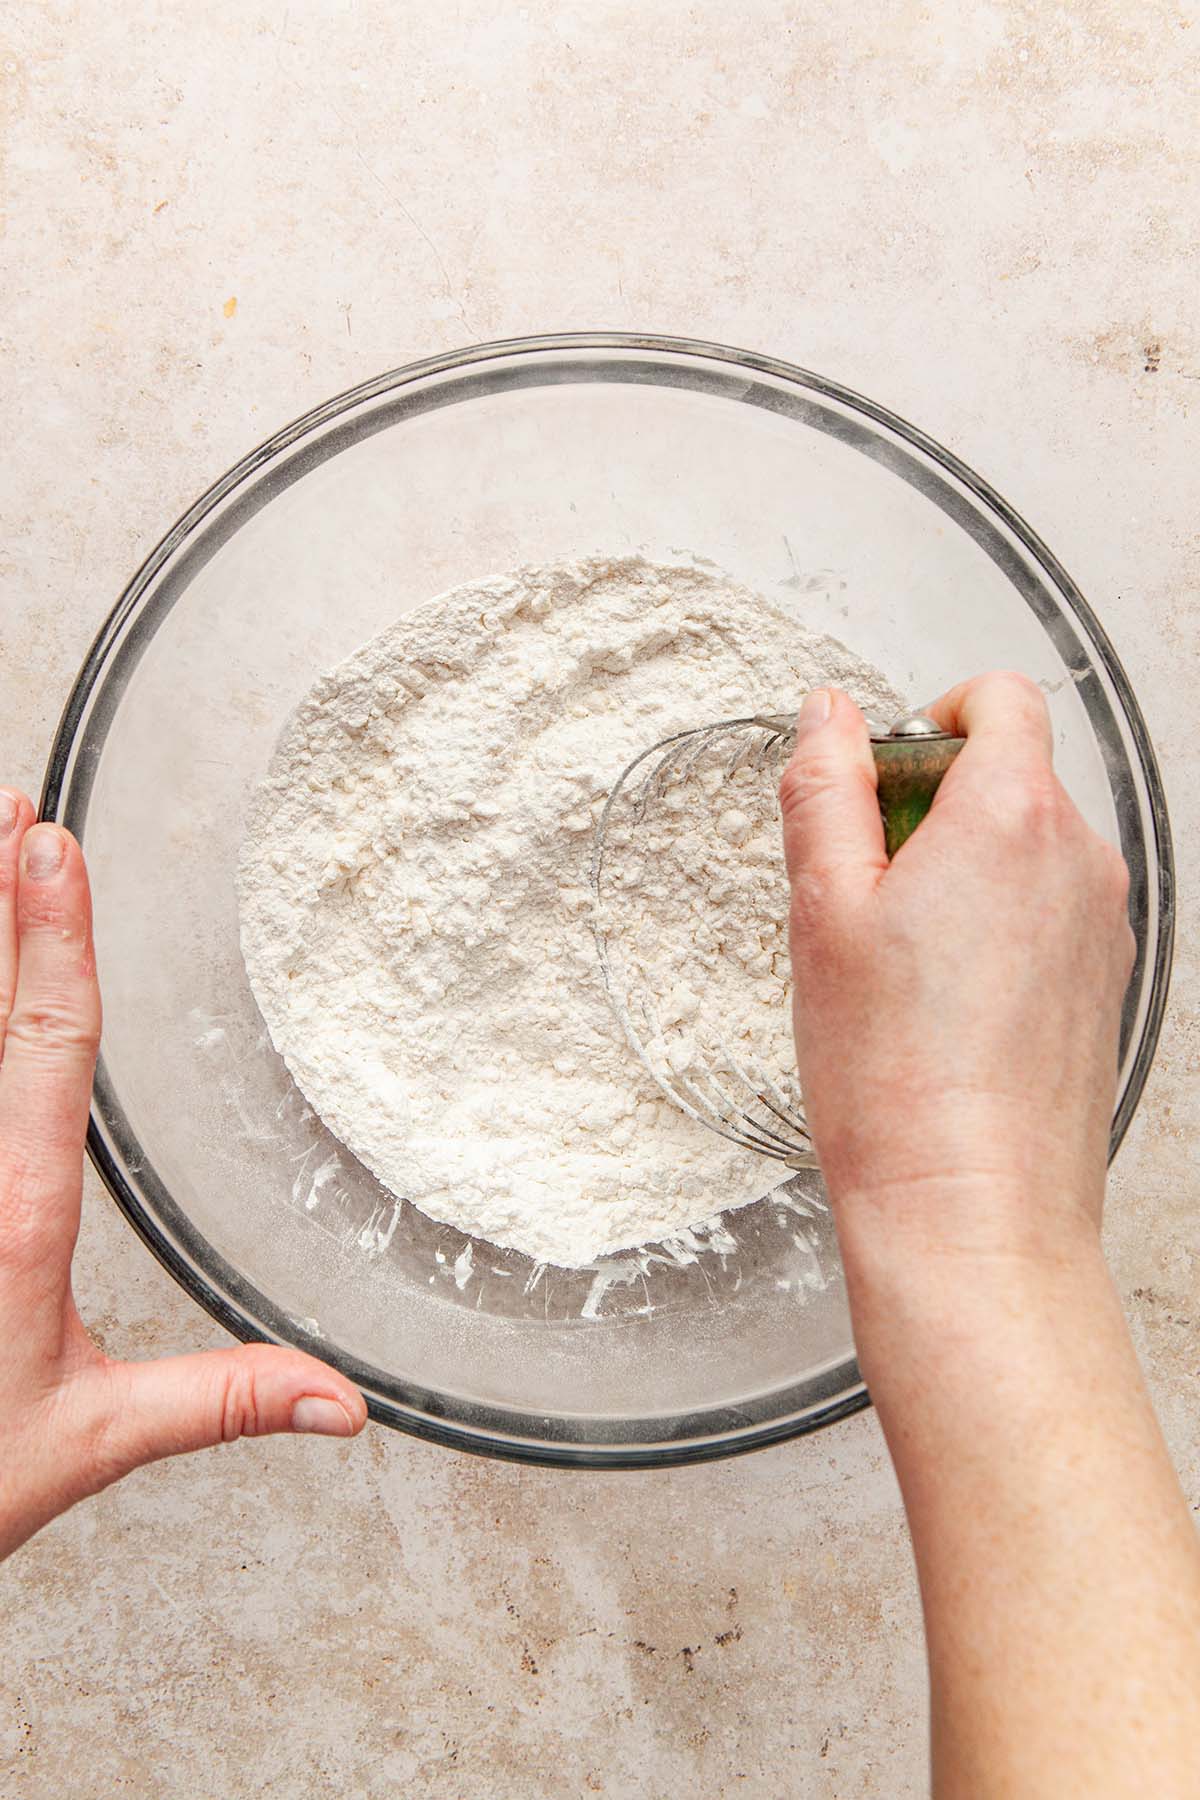 A hand using a pastry blender to mix butter into a bowl of dry ingredients.